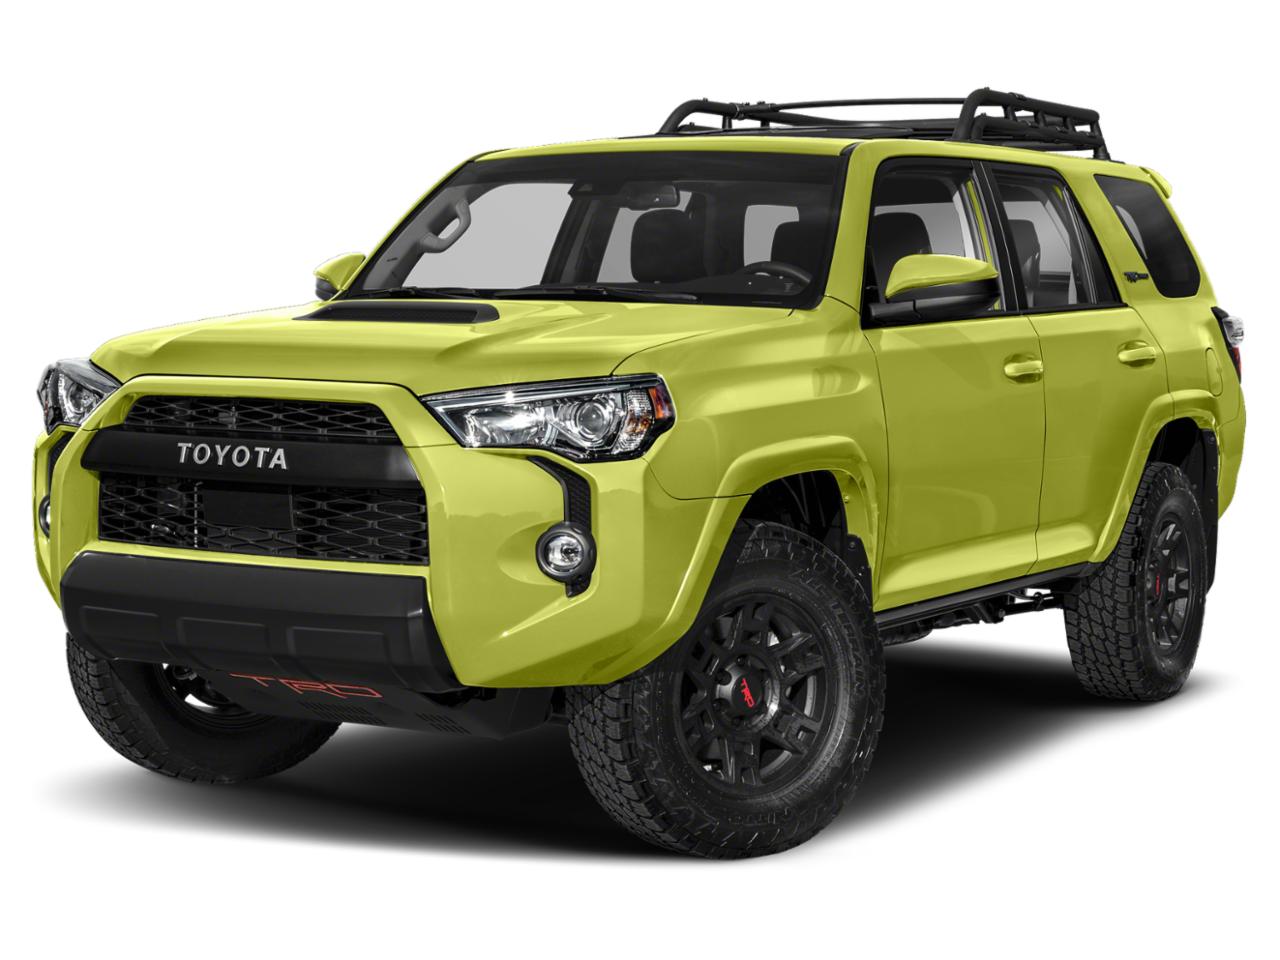 San Francisco Toyota now offers the Toyota 4Runner SUV in 10 different exterior paint color options.